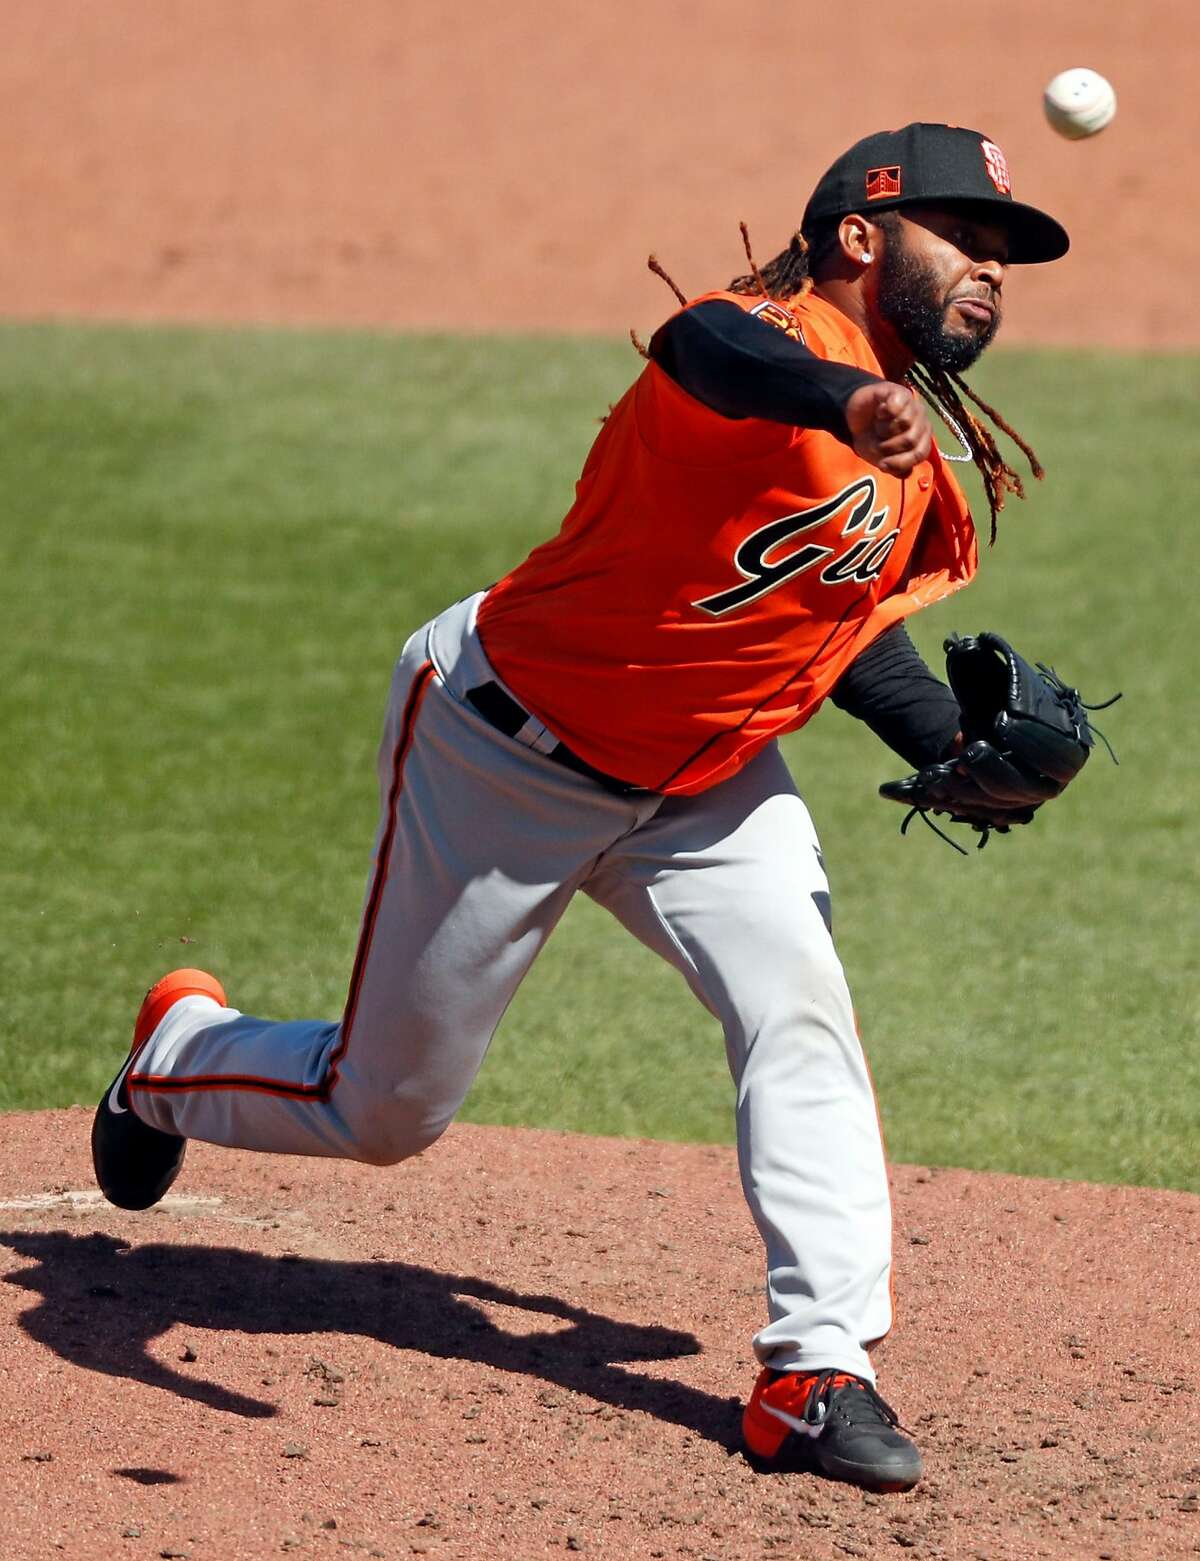 San Francisco Giants' Johnny Cueto during intrasqaud game at Oracle Park in San Francisco, Calif., on Tuesday, July 14, 2020.